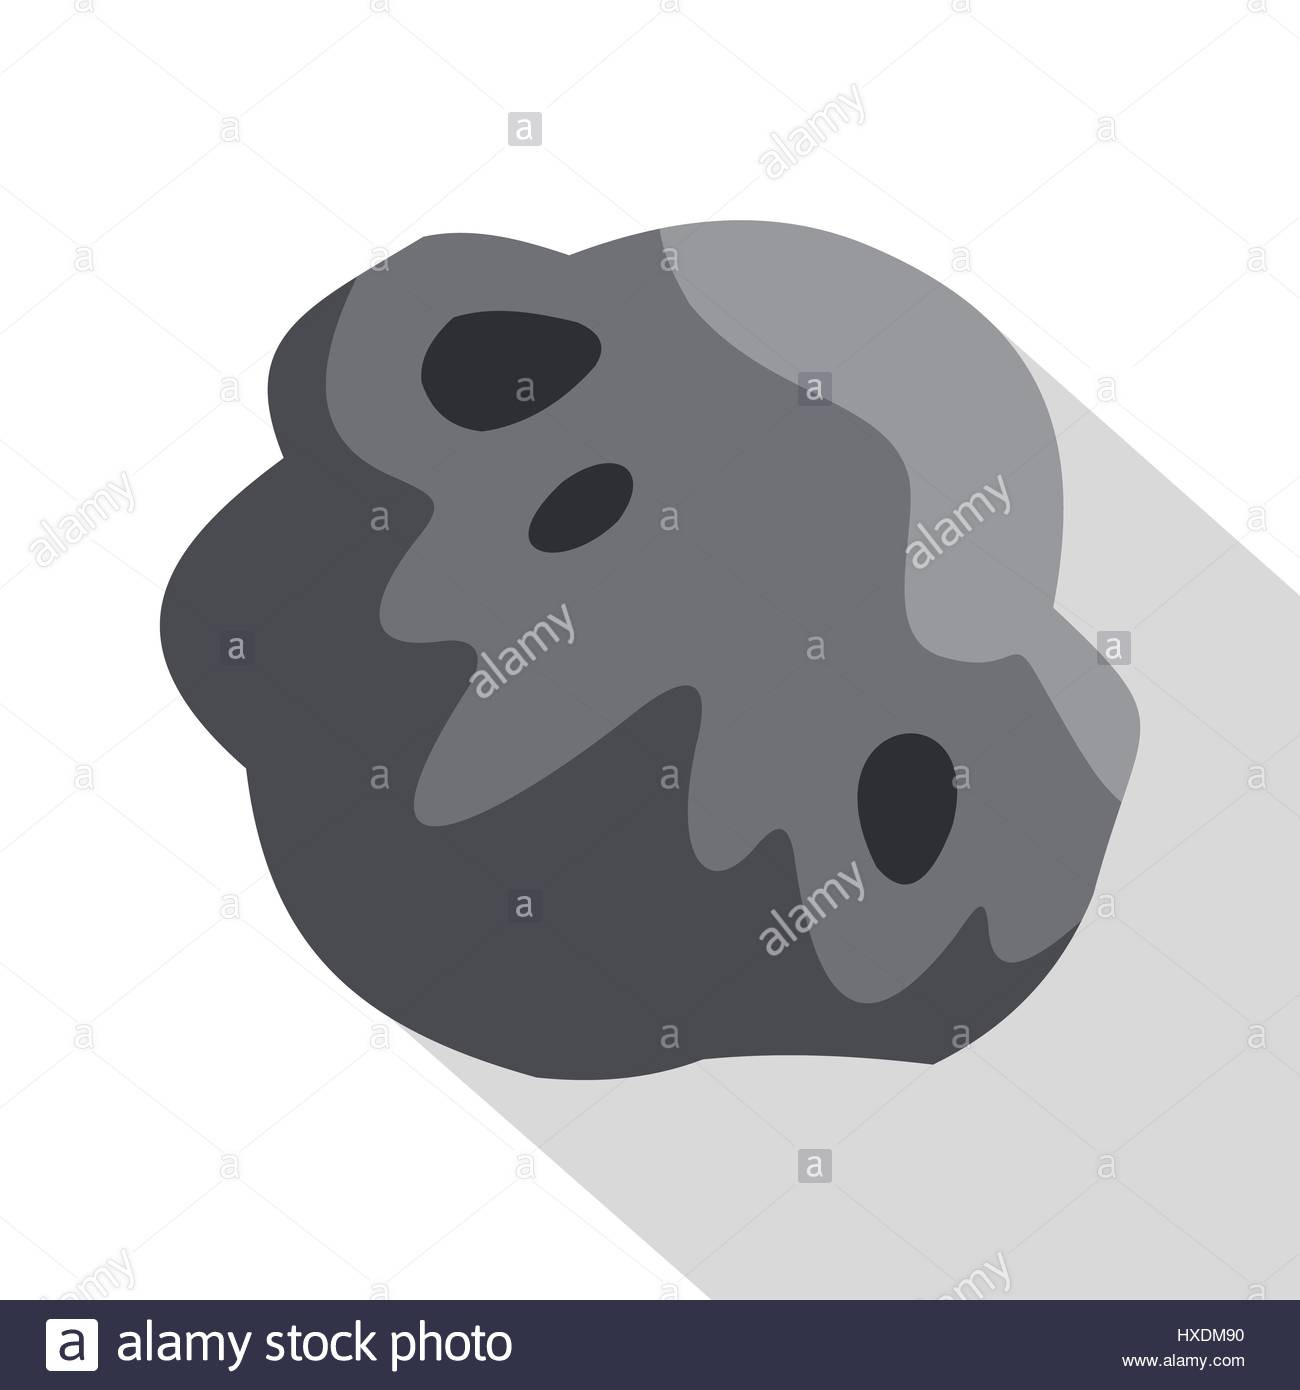 Asteroid, asteroids, danger, hazard, outer space, risk, space icon 